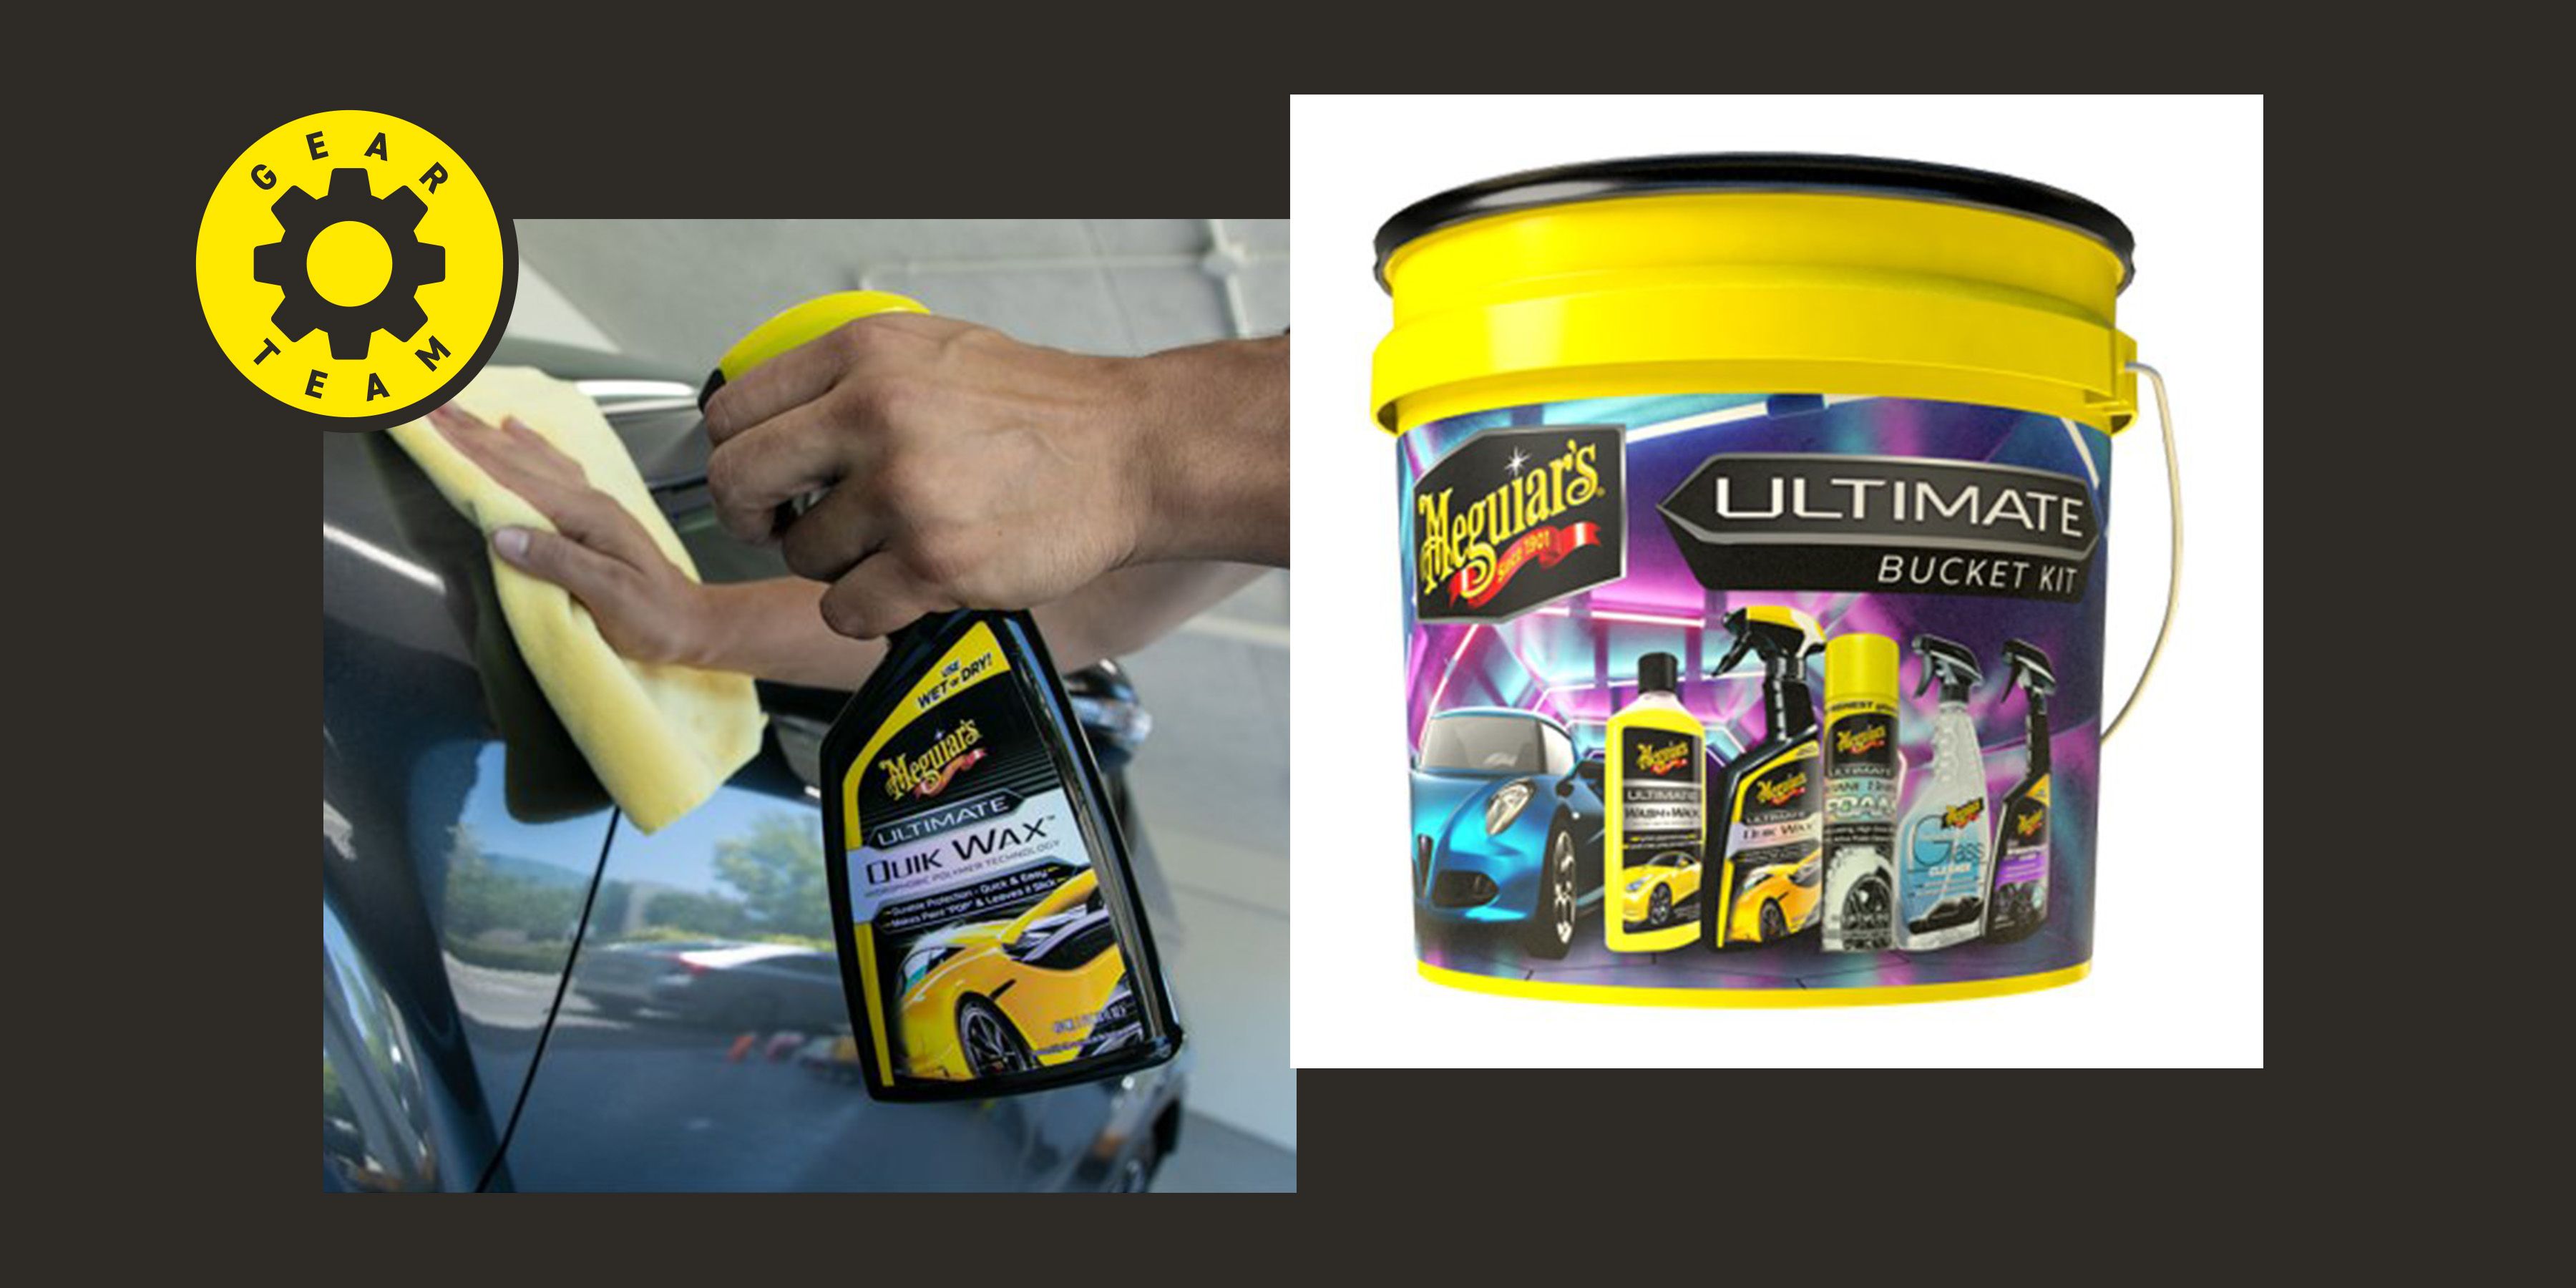 Deal Alert: Save Nearly $20 on This Meguiar's Ultimate Car-Cleaning Bucket at Walmart